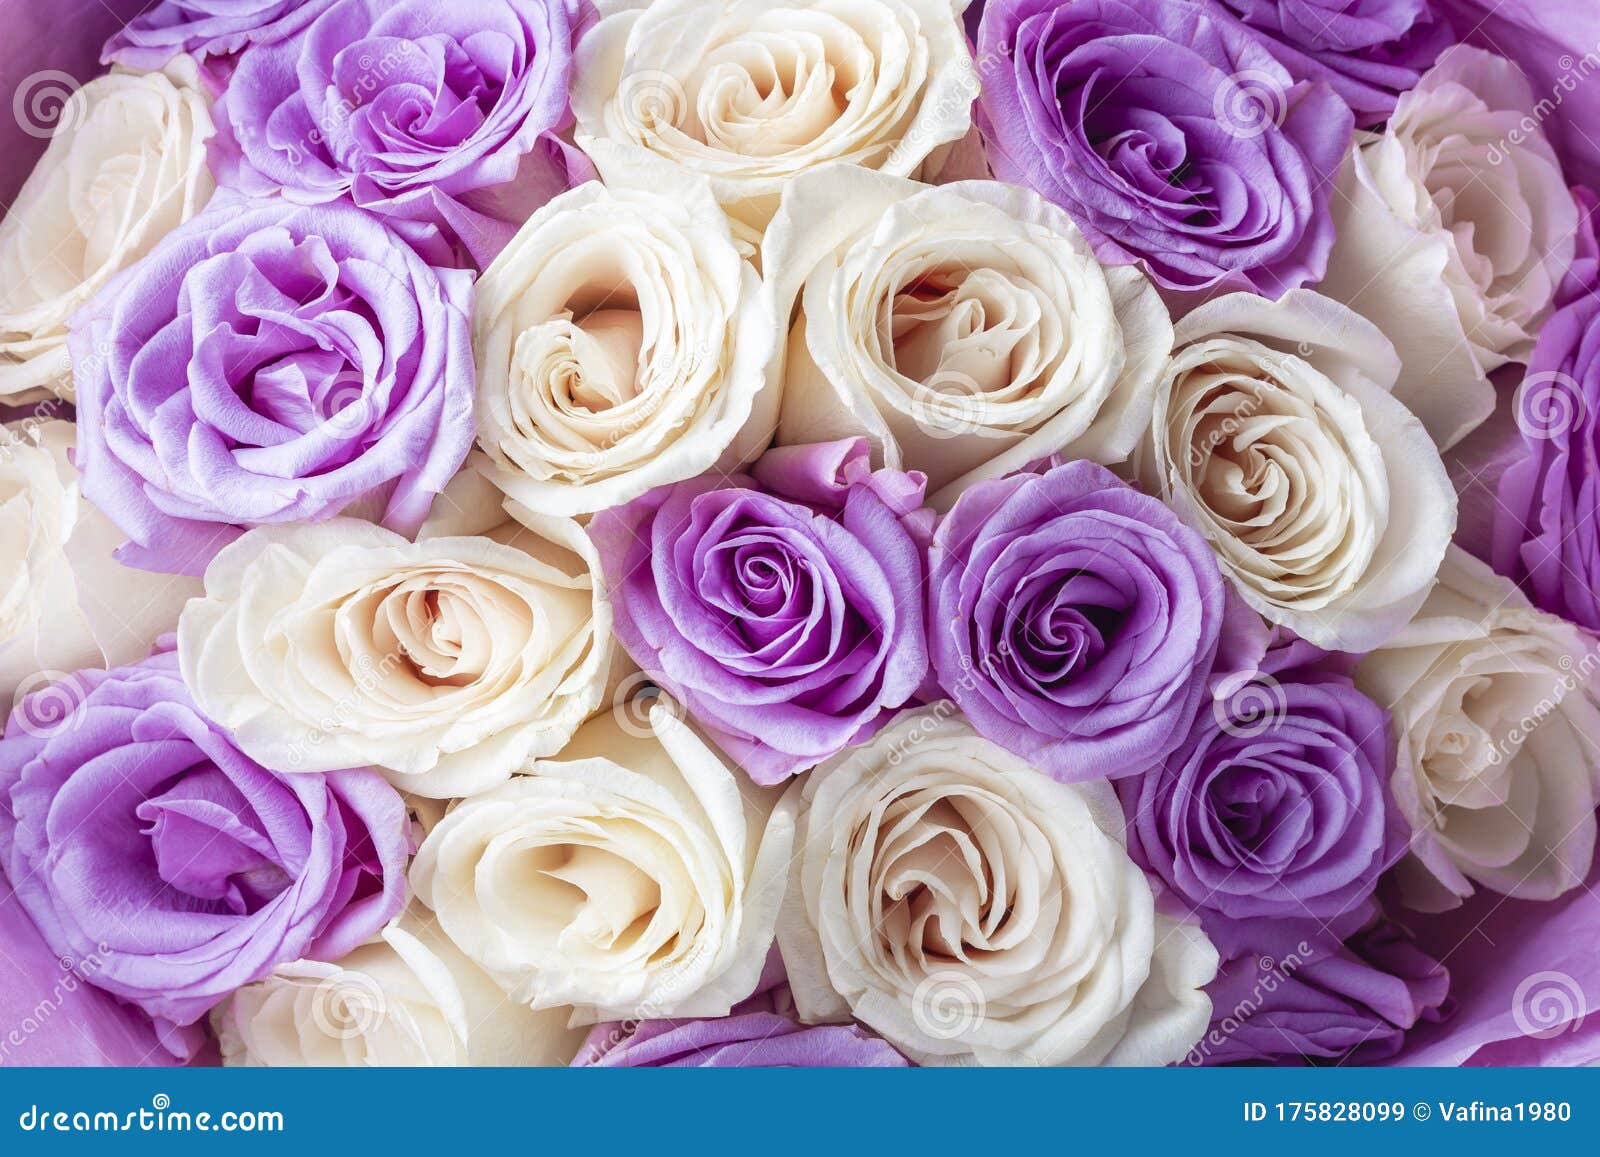 Natural Background of Fresh Amazing White and Purple Roses for Wallpaper,  Postcard, Cover, Banner. Wedding Decoration Stock Image - Image of flora,  decoration: 175828099